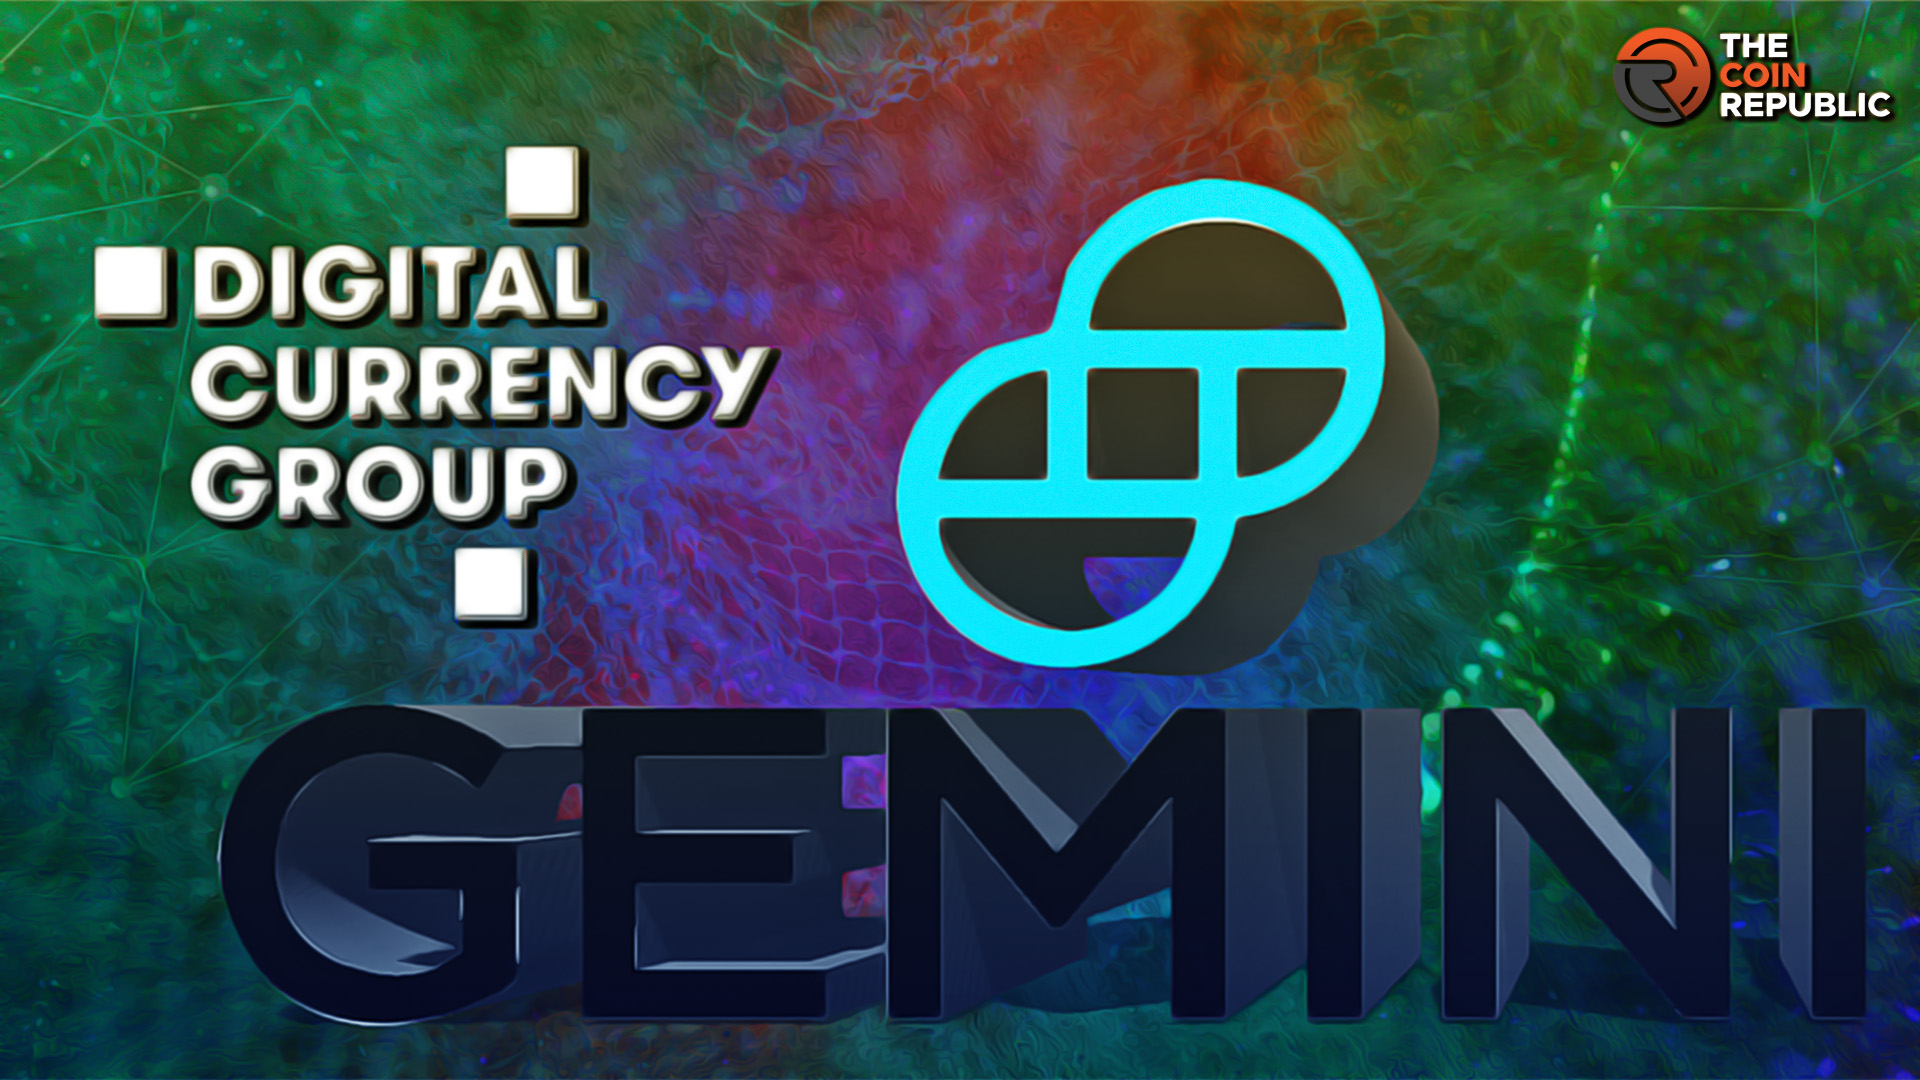 Gemini Accuses DCG For Fraudulent Actions in Recent Court Filing